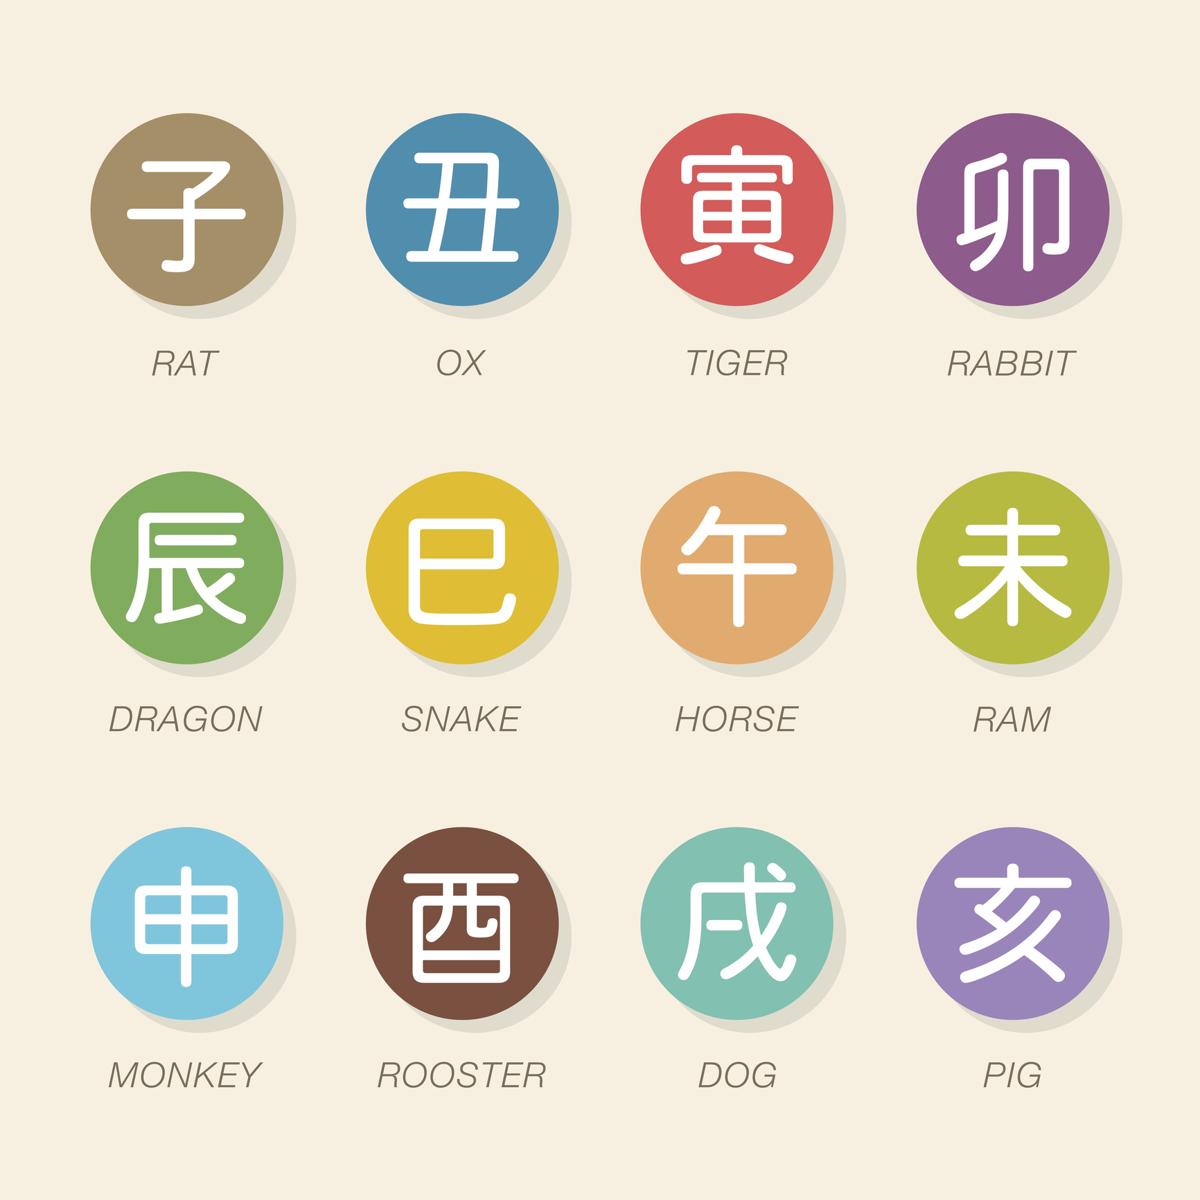 Everything You Need to Know About the Japanese Zodiac Signs - Astrology Bay